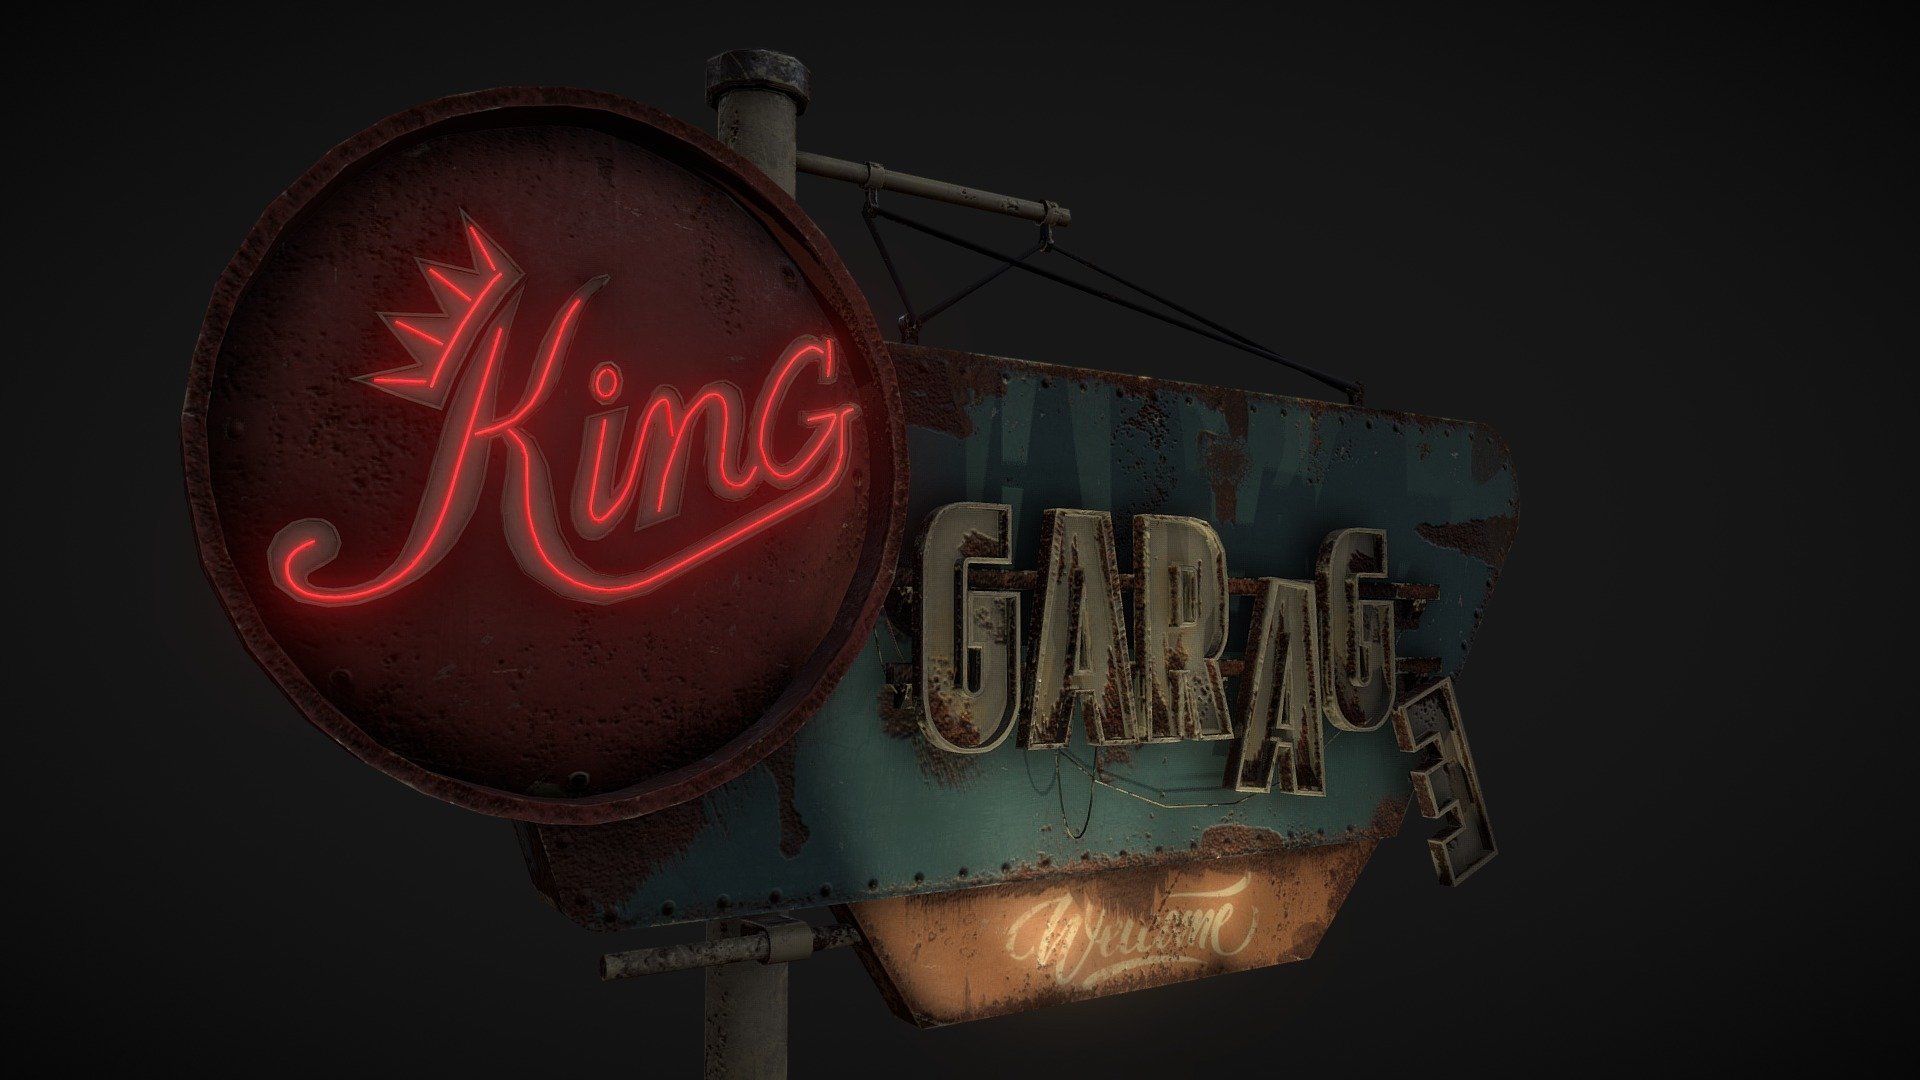 Garage sign inspired by Kirill Barybin's design. 
Modeled in Autodesk Maya, 
Textured In Substance Painter and Photoshop, 
Lighting and Shading in Unreal Engine 4 3d model